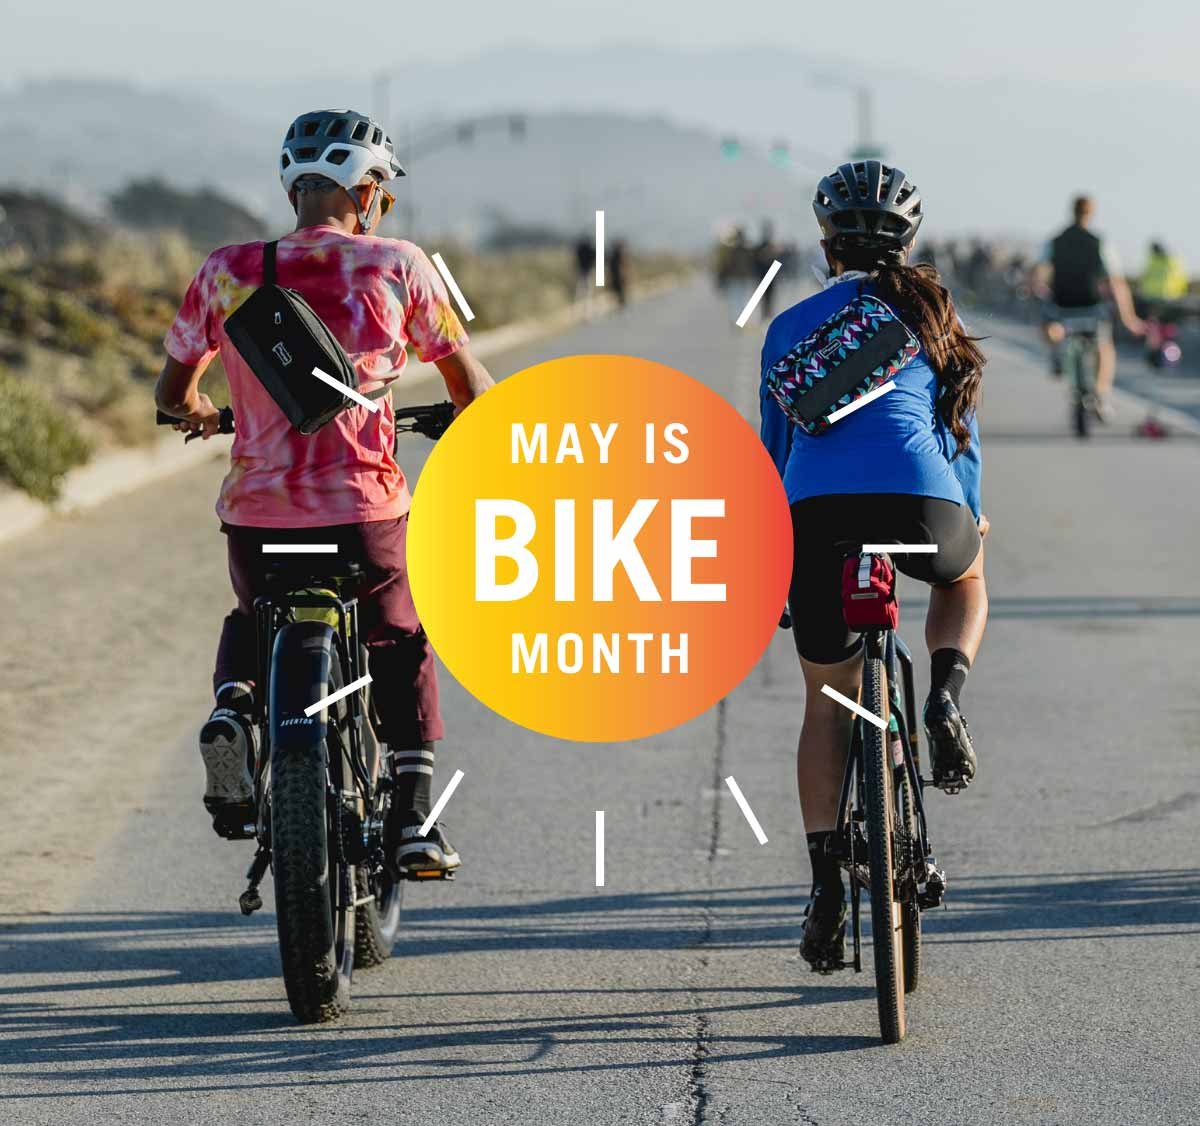 May is BIKE Month